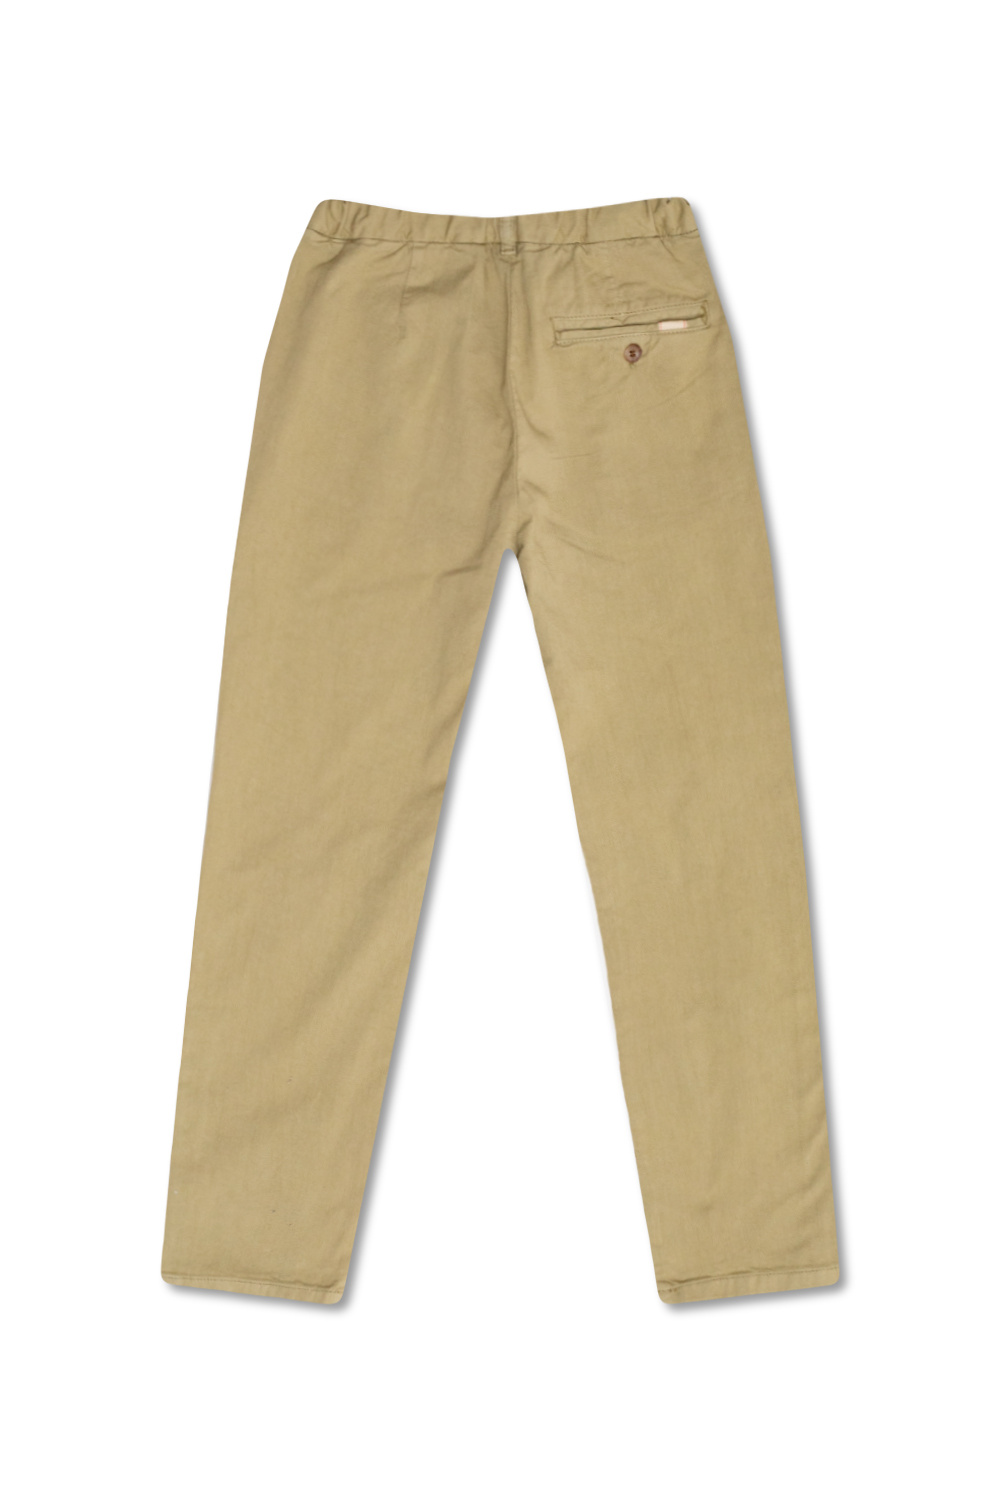 Bonpoint  trousers Hem with pockets